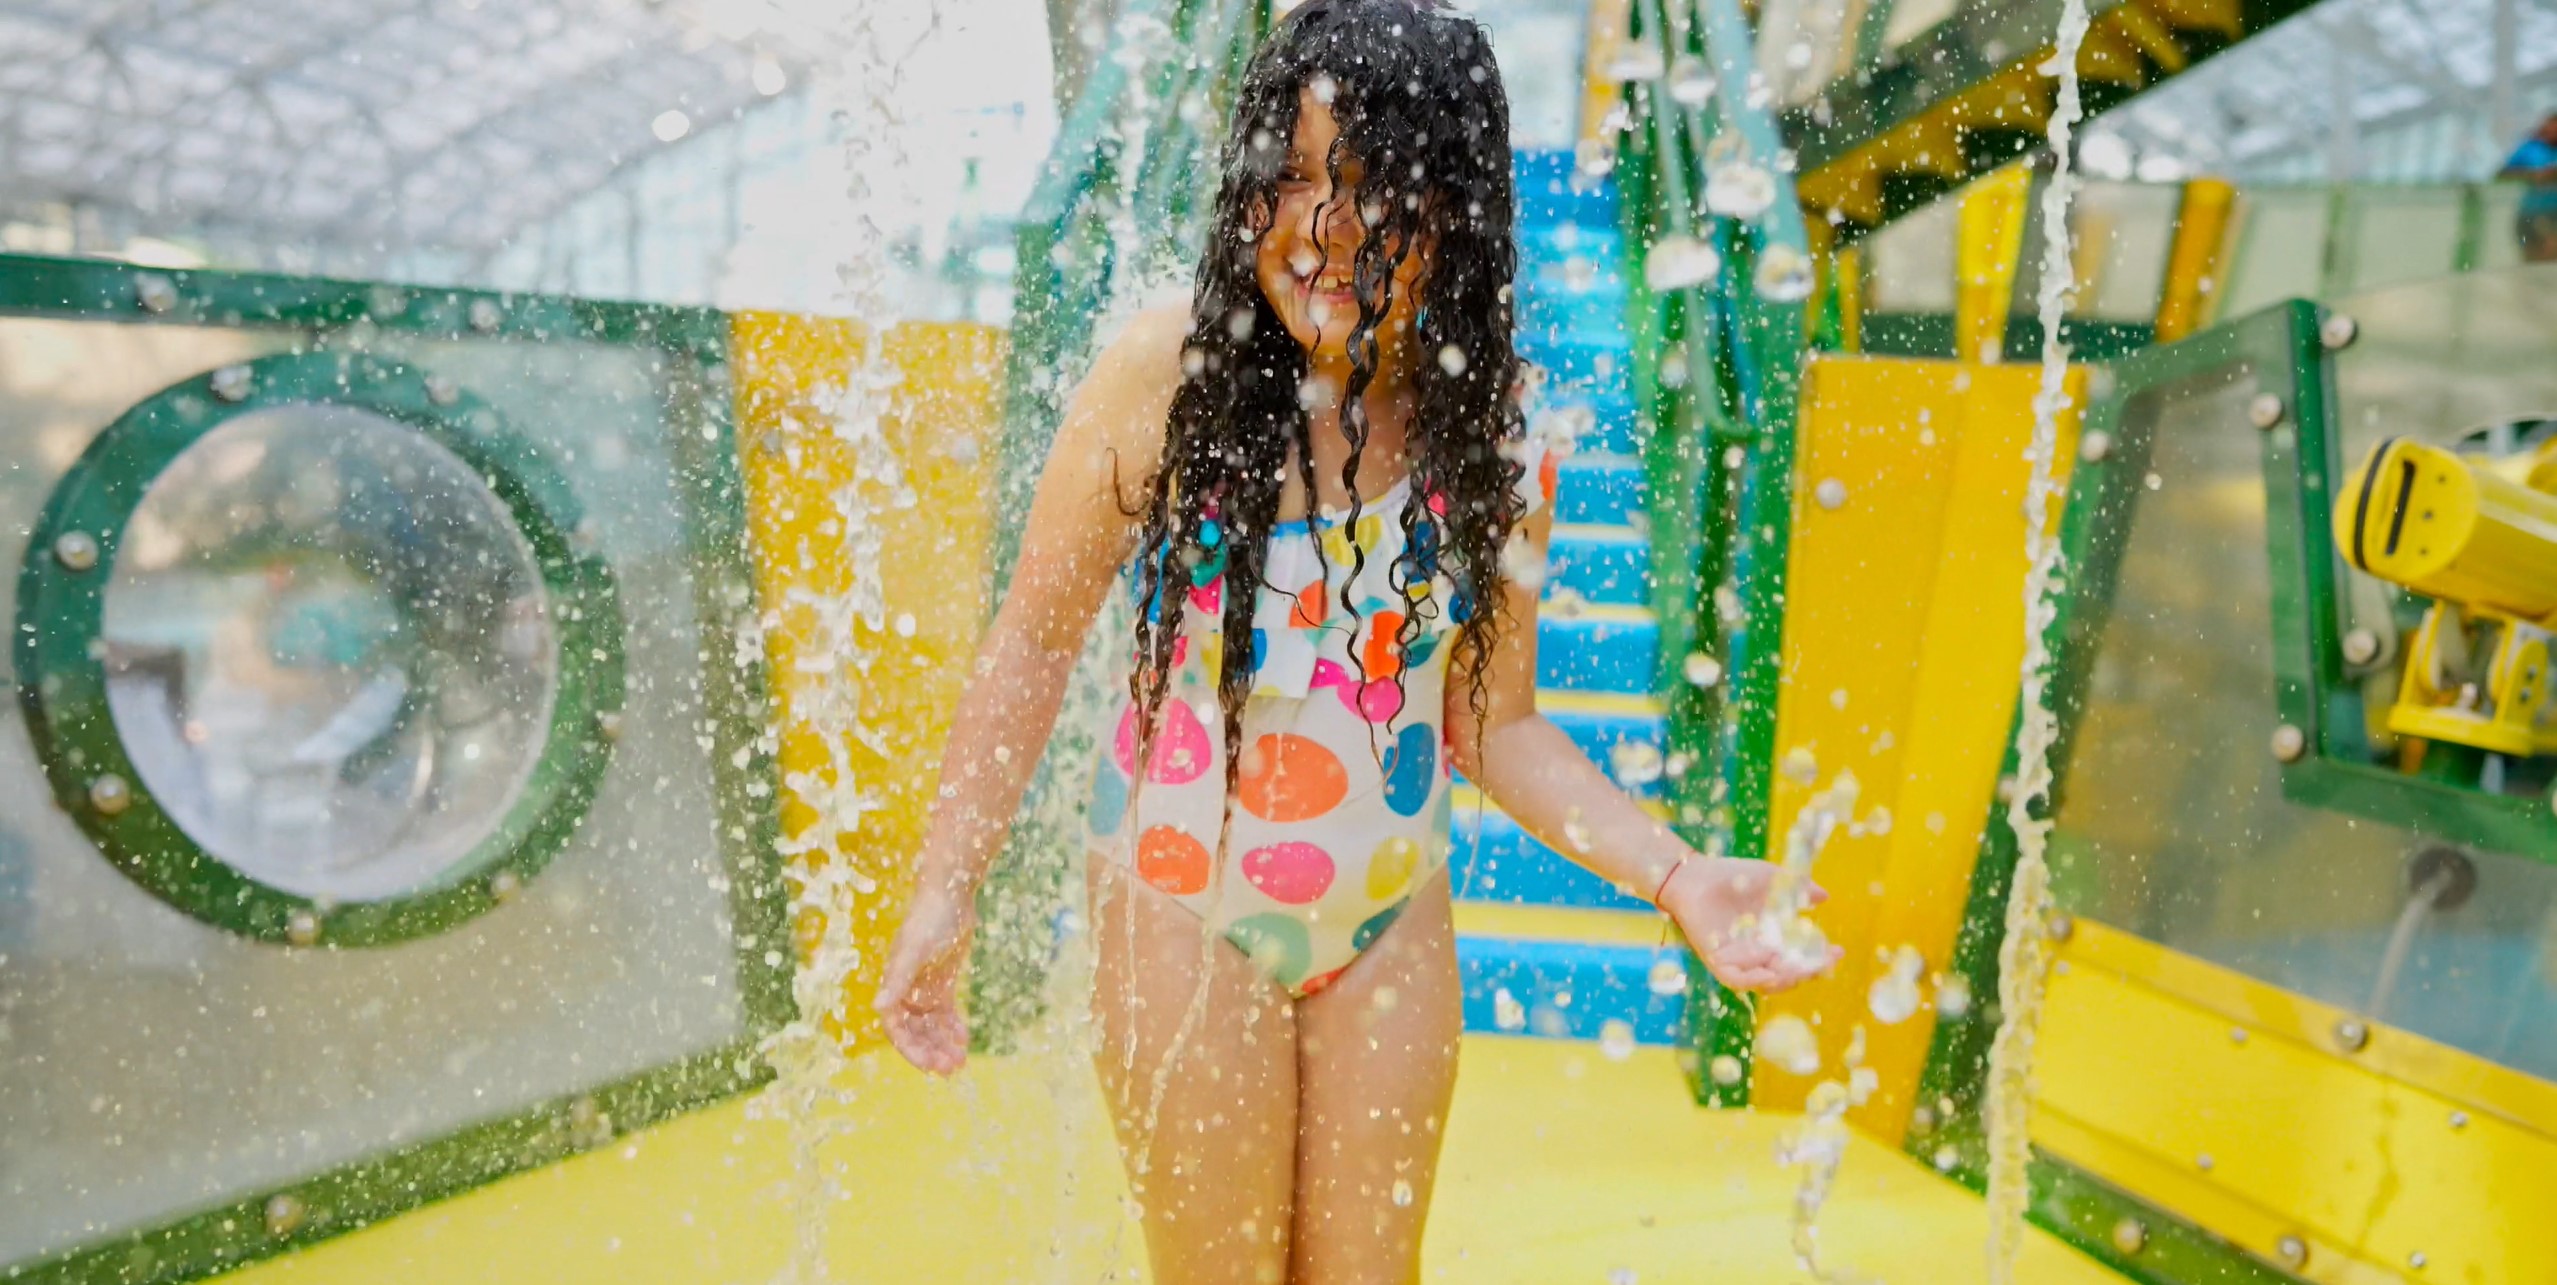 Child playing at interactive aquatic play structure